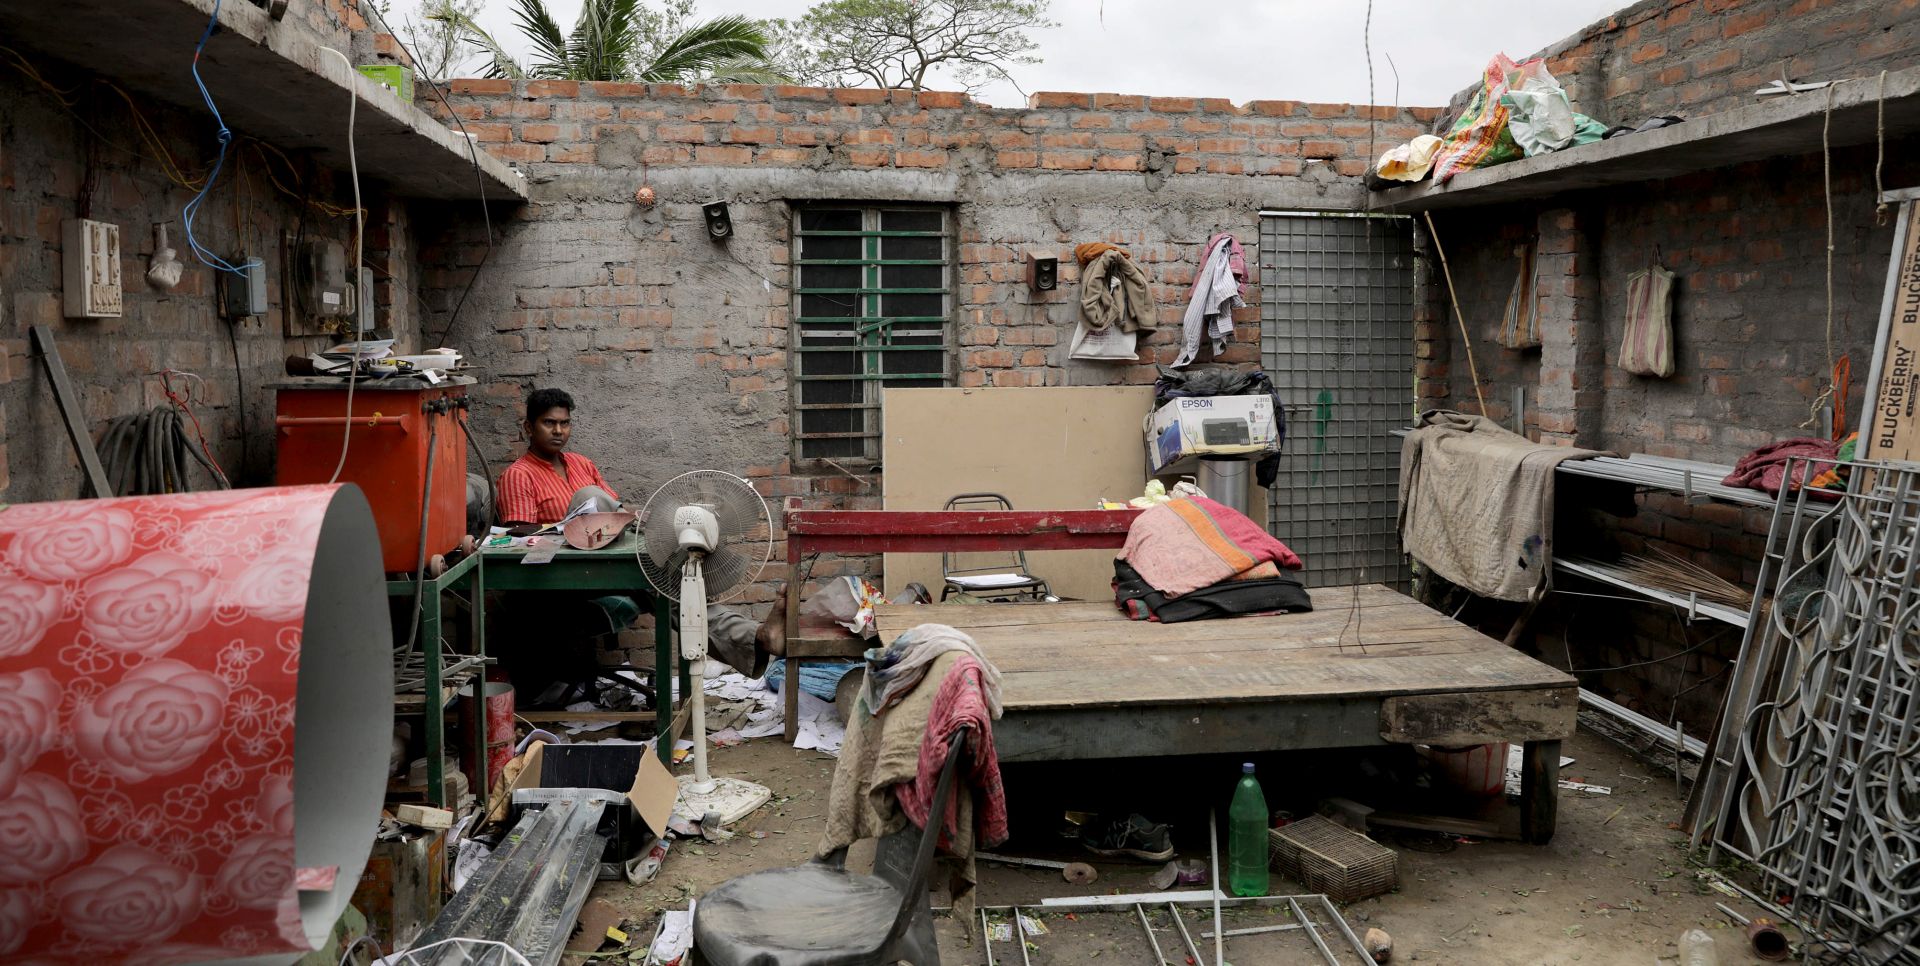 epa08435246 A cyclone victim sits in his house without a roof after Cyclone Amphan made landfall, in Bokkhali village near the Bay of Bengal, India, 21 May 2020. The Odisha government and Bengal government are considering a mass evacuation of the area.  EPA/PIYAL ADHIKARY